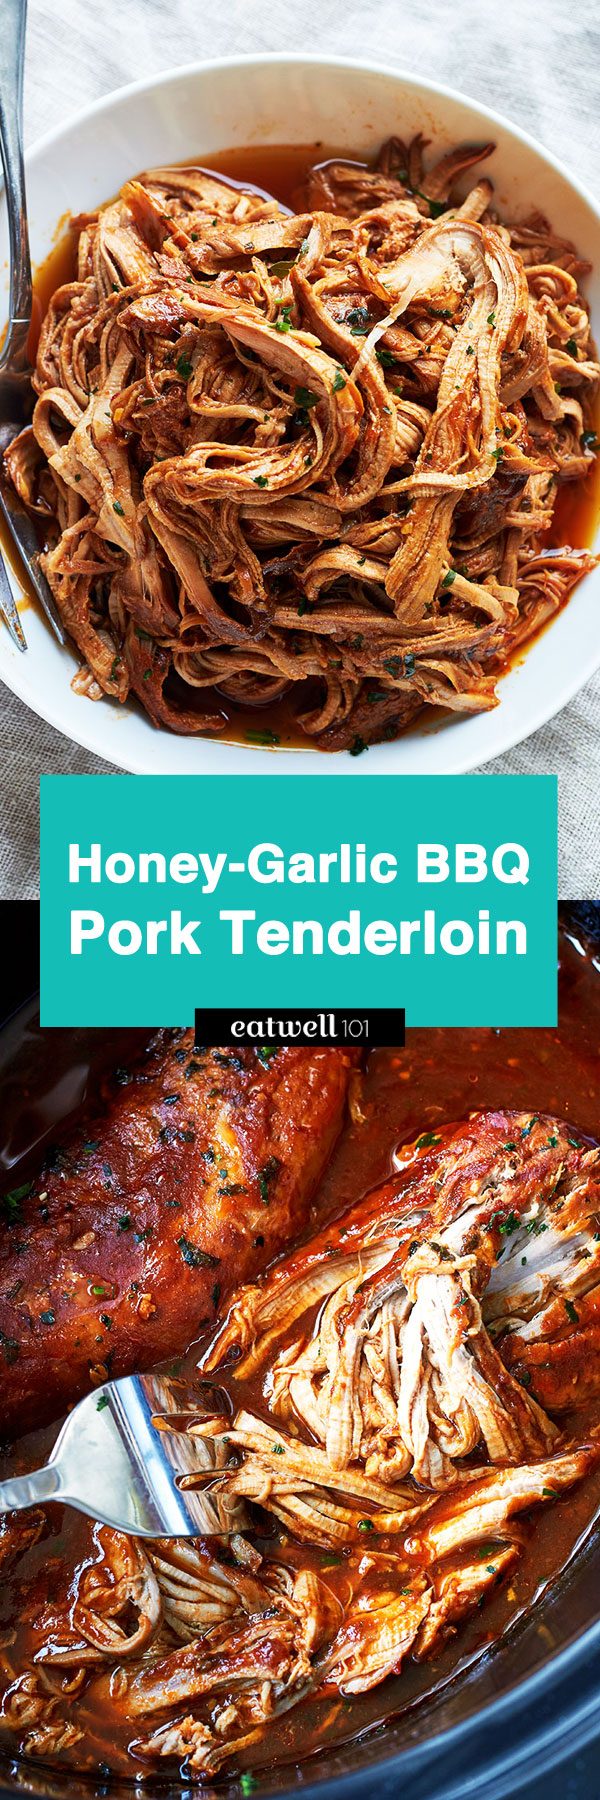 Slow Cooker BBQ Pork - #slowcooker #recipe #- The most amazing FALL-APART TENDER pork goodness! Cooked low and slow right in the crockpot!